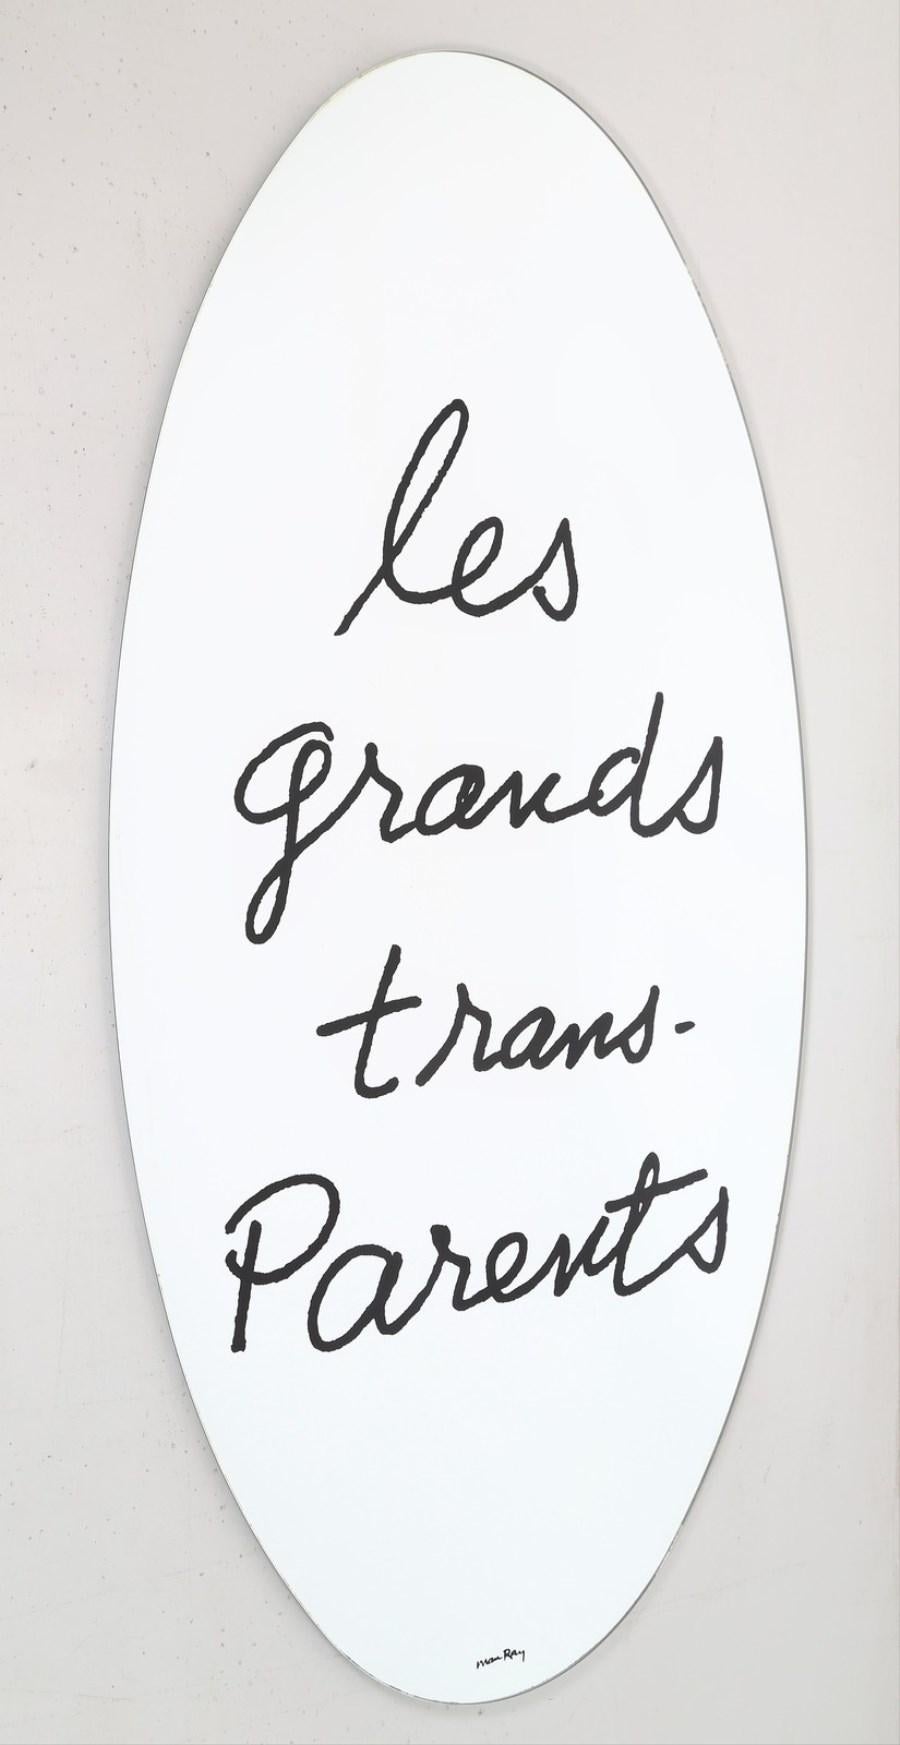 Post-Modern Man Ray, Mirror Les Grand Trans-Parents, Simon Gavina (First Edition) For Sale